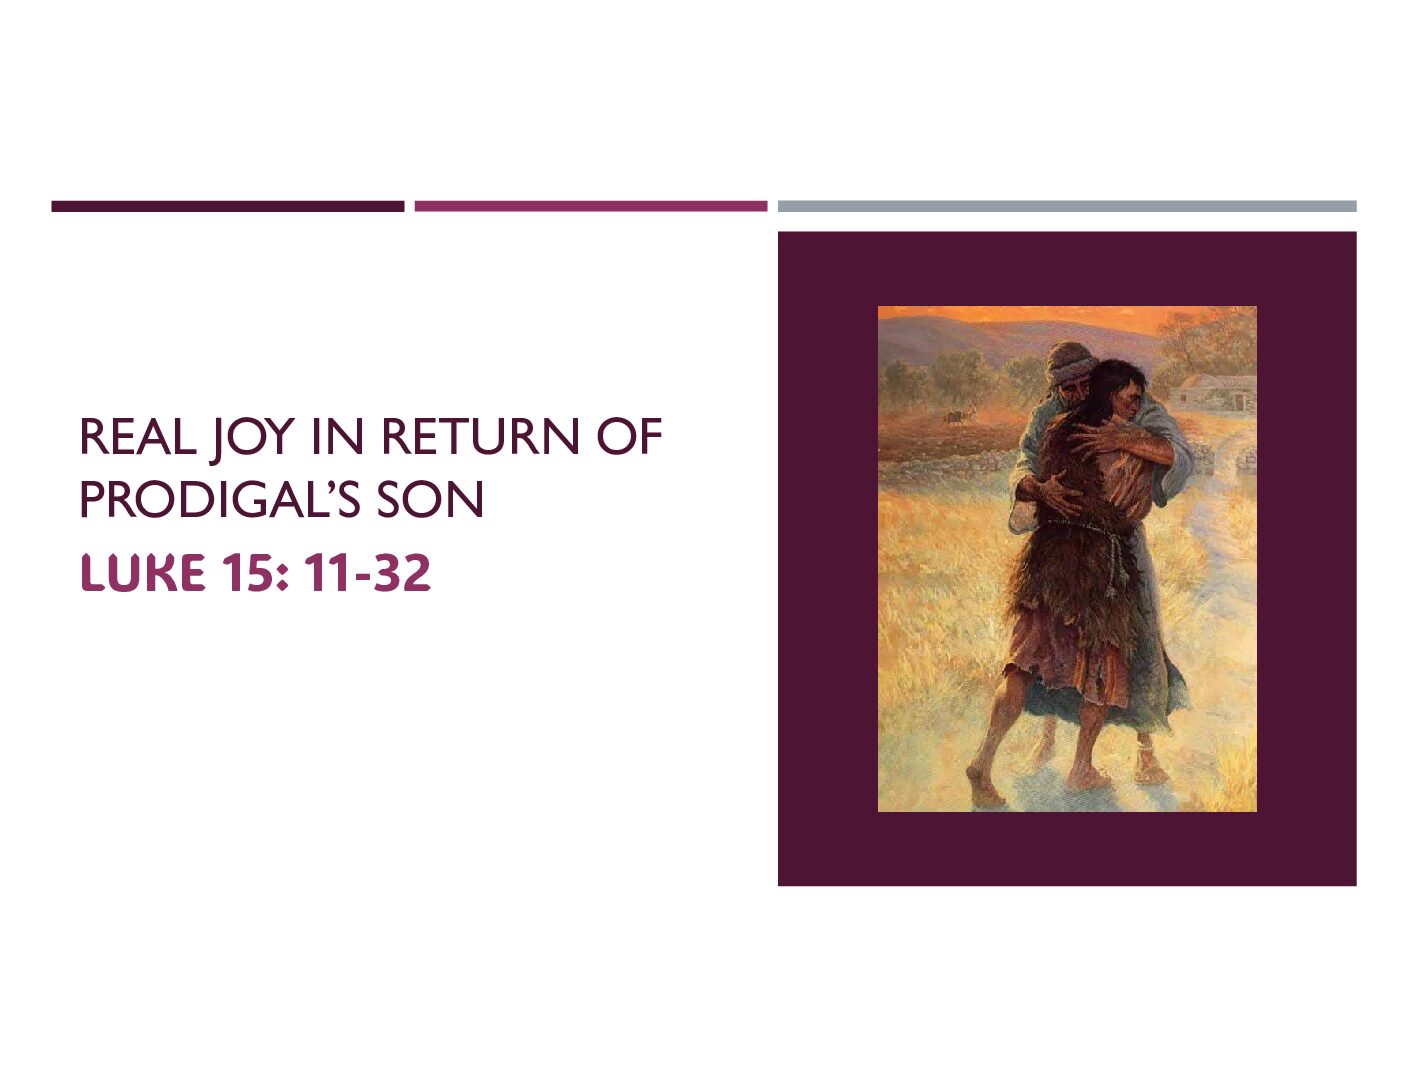 March 24, 2024- ‘REAL JOY IN RETURN OF PRODIGAL’S SON’